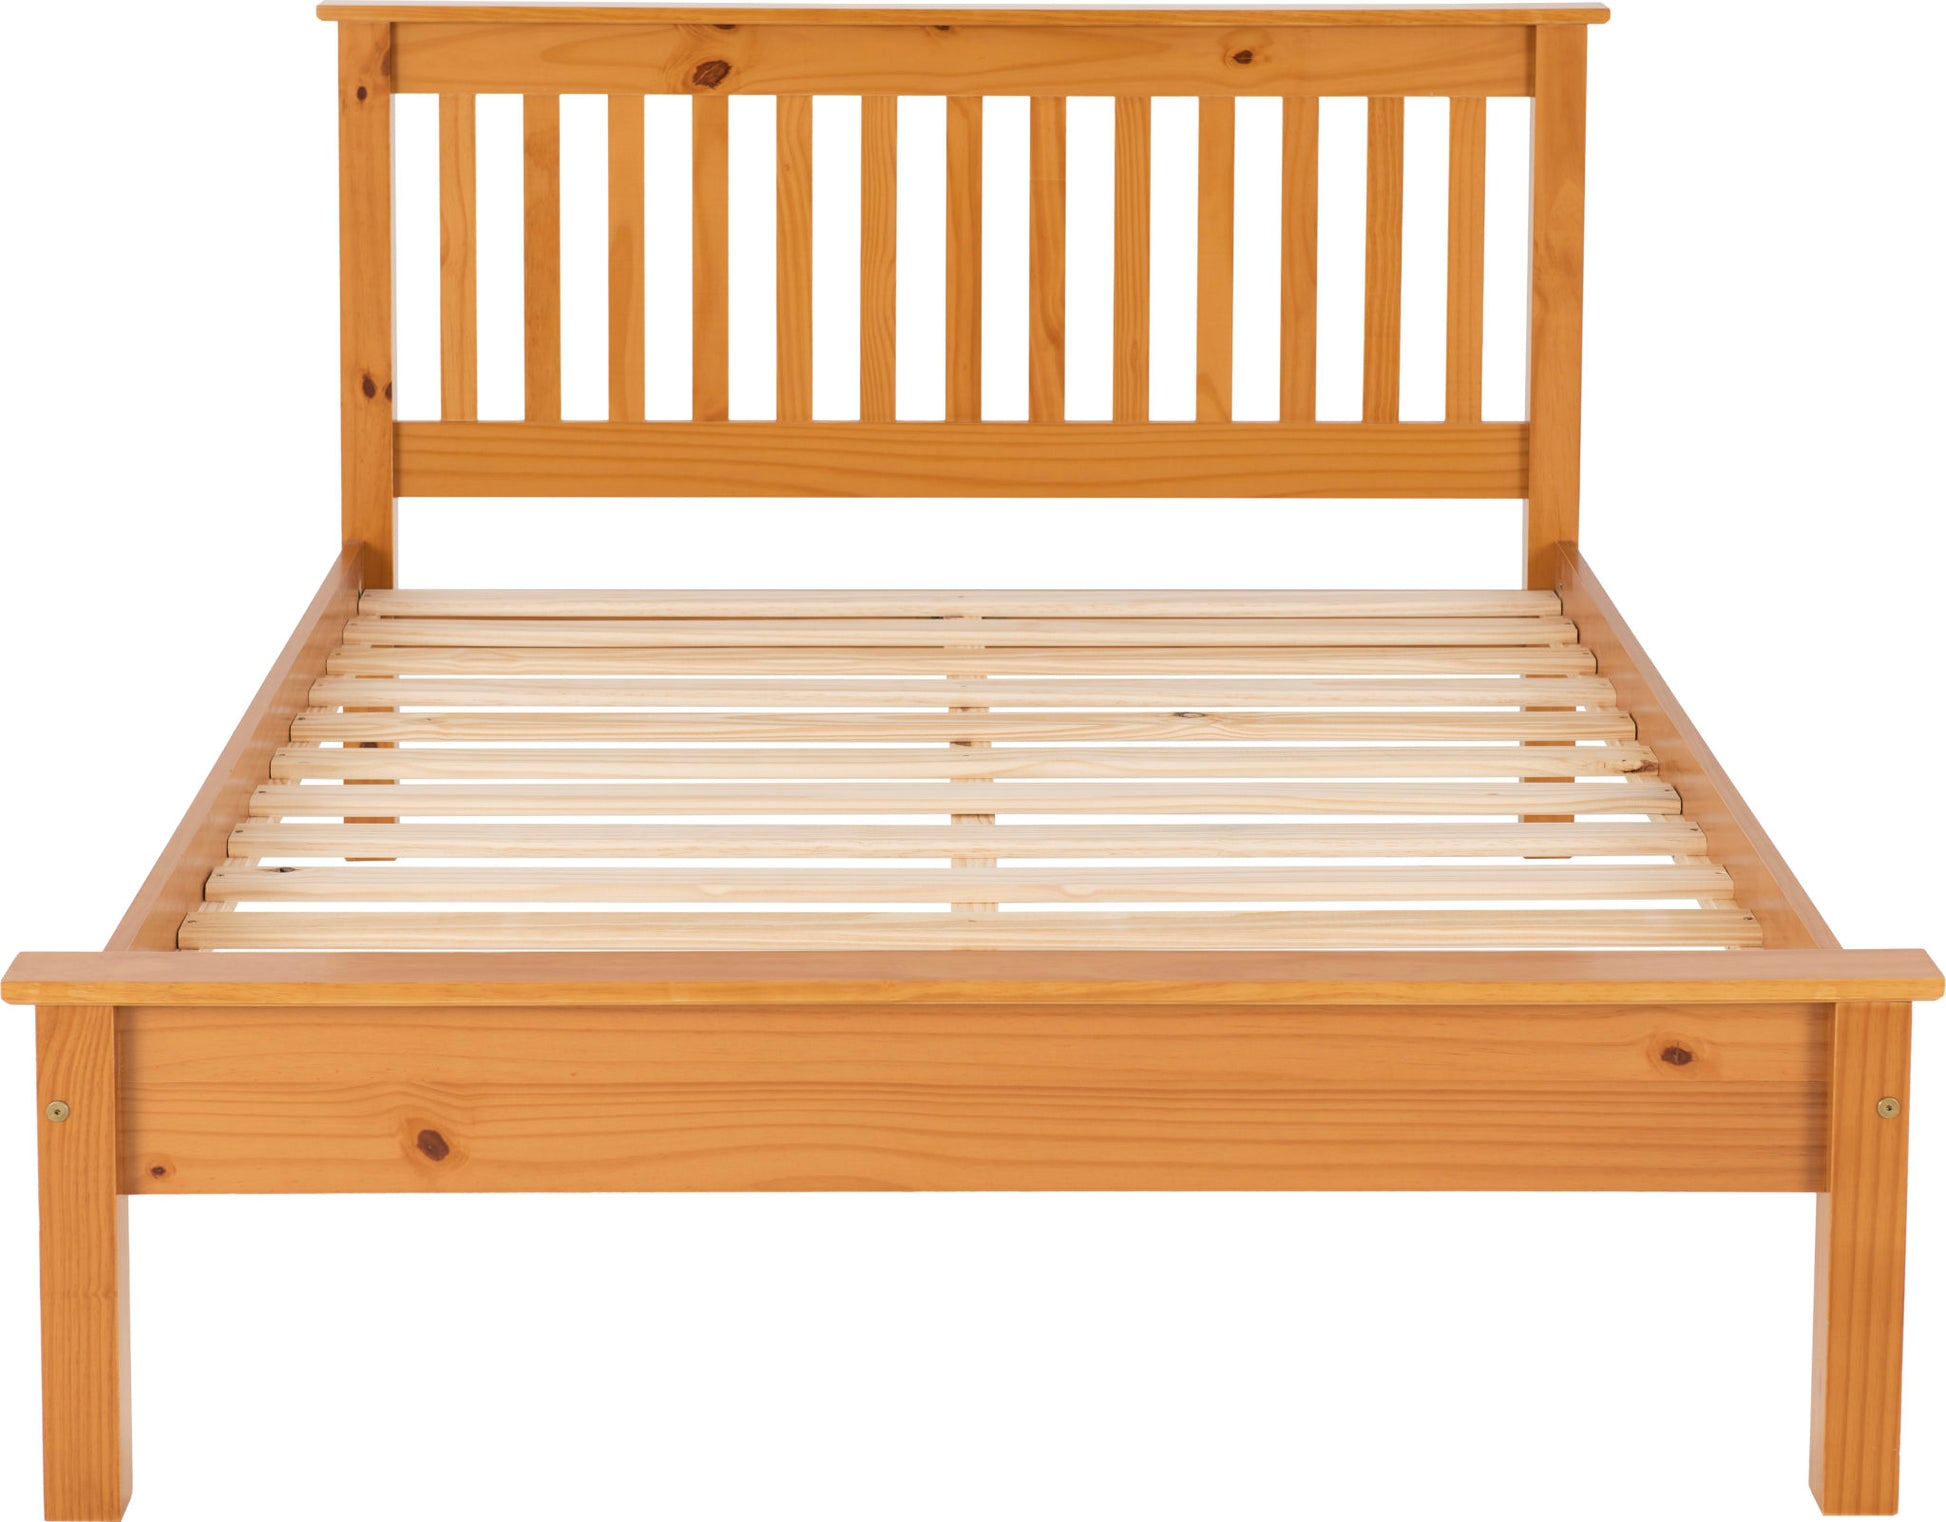 MONACO-46-LOW-END-BED-ANTIQUE-PINE-2020-200-203-029-09-scaled.jpg